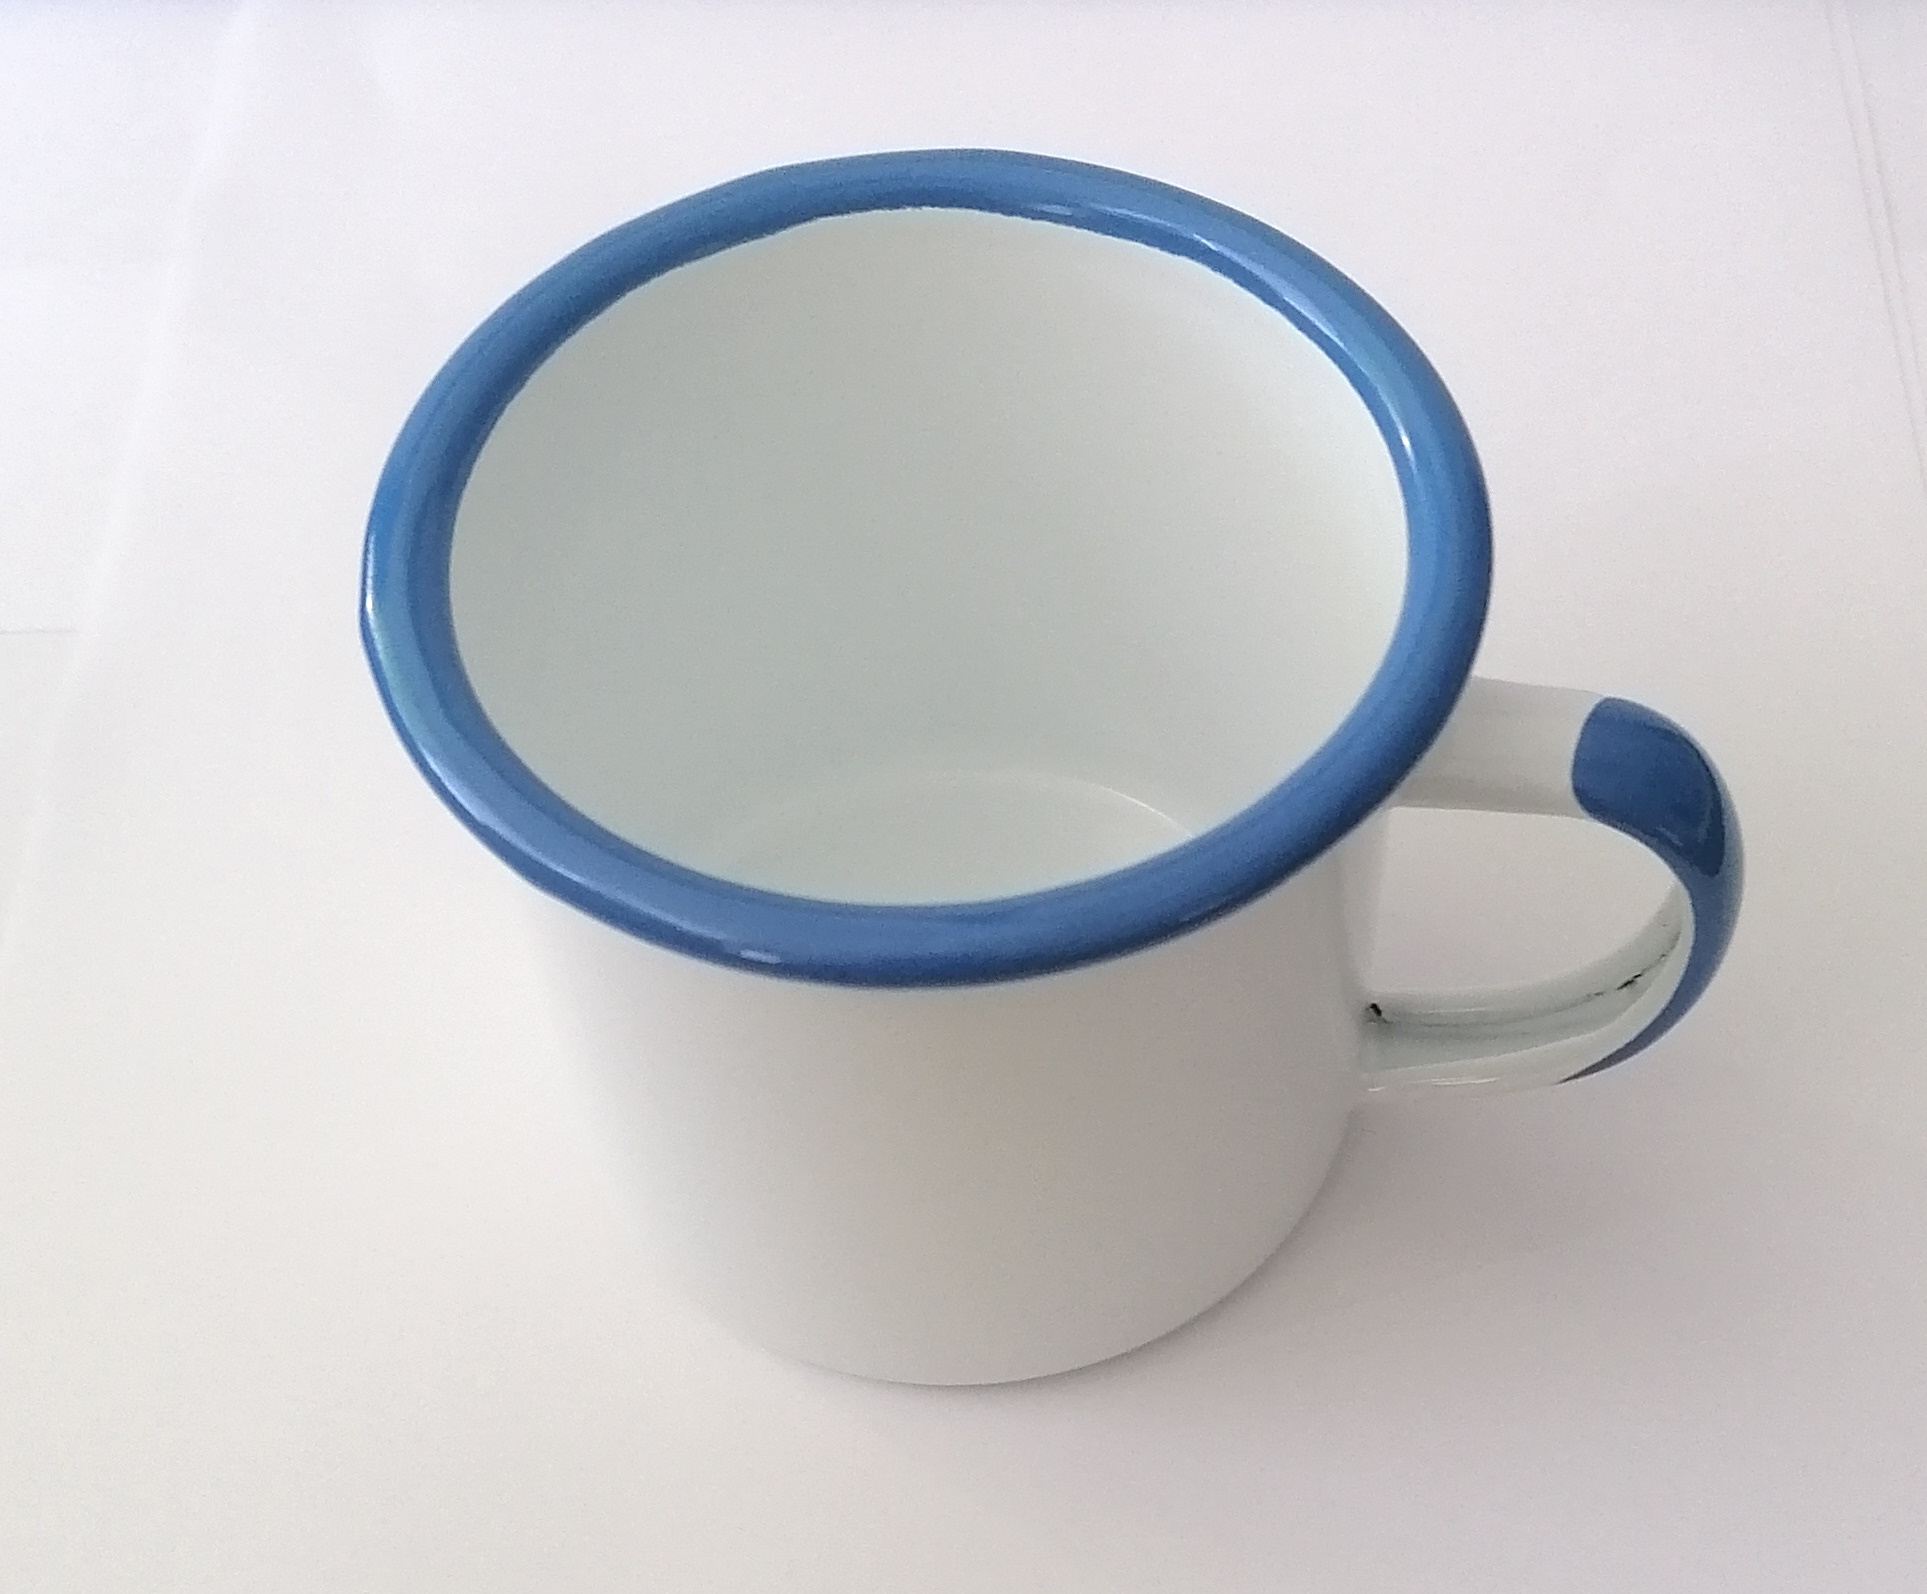 Enamel steel mug for sublimation with blue rim and handle